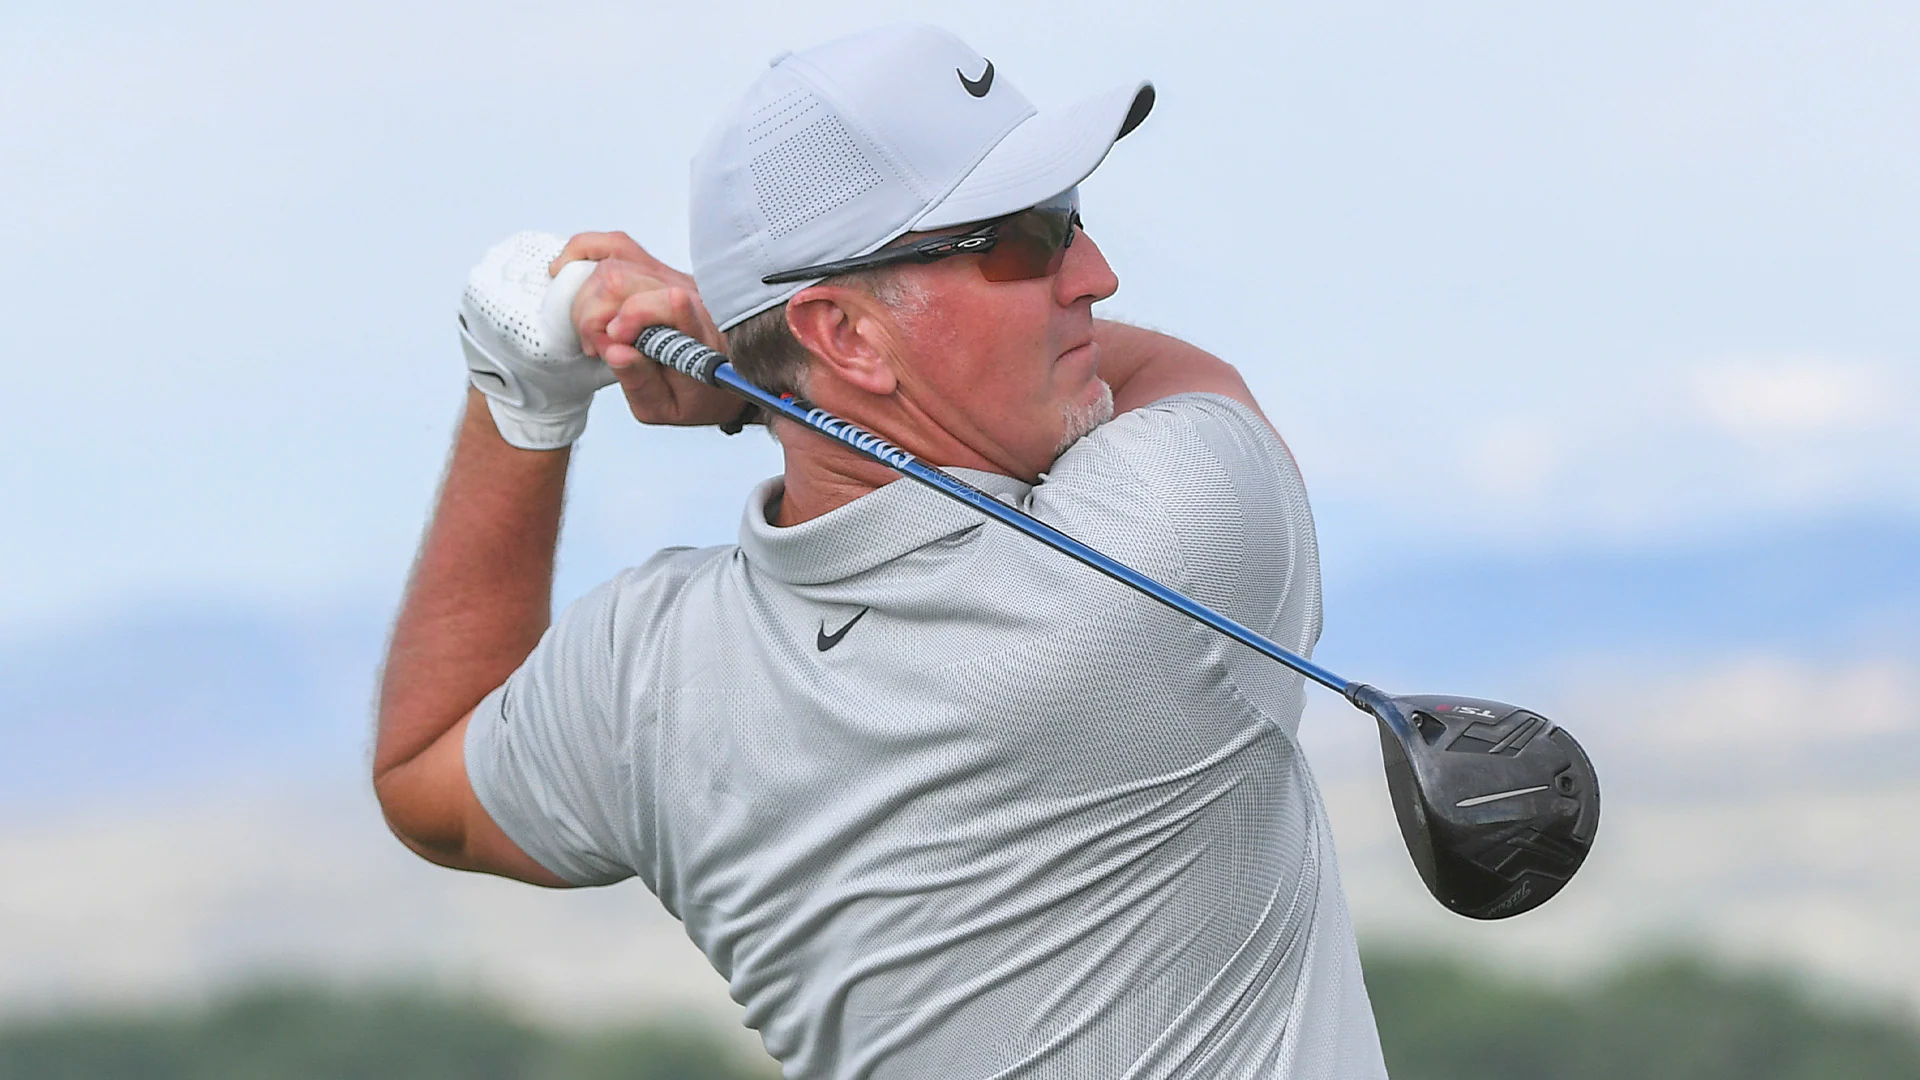 David Duval ready for second chance at golf career in first PGA Tour Champions start 2